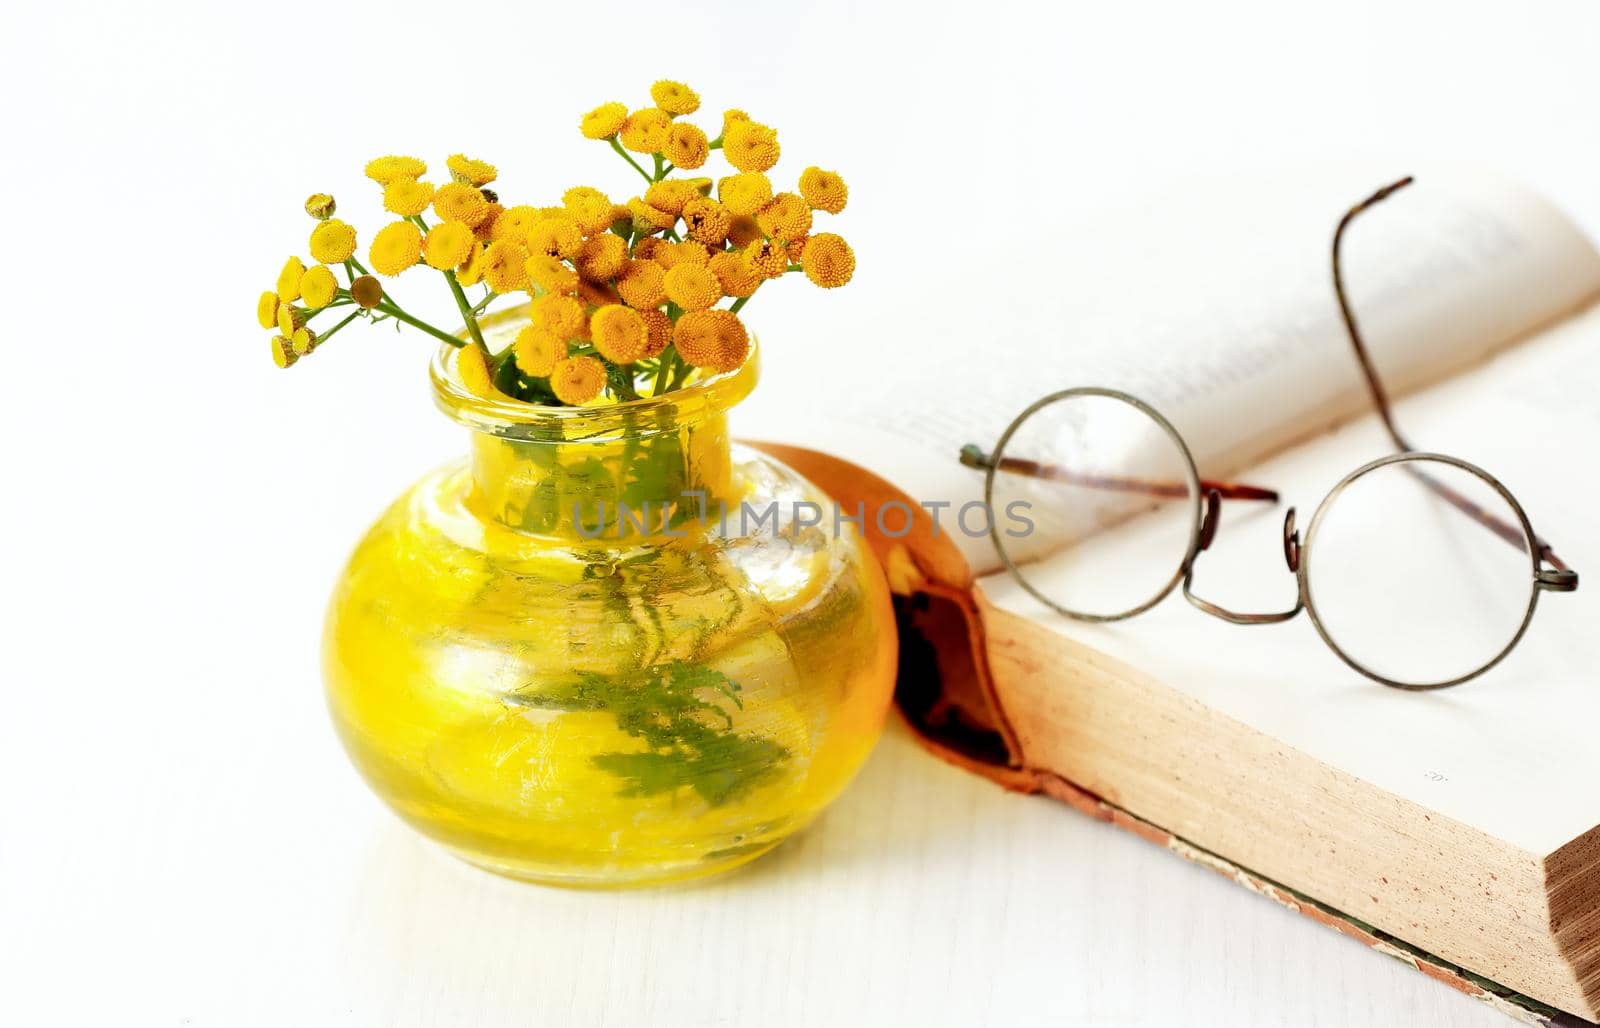 Bouquet of yellow wild flowers near old book on white background